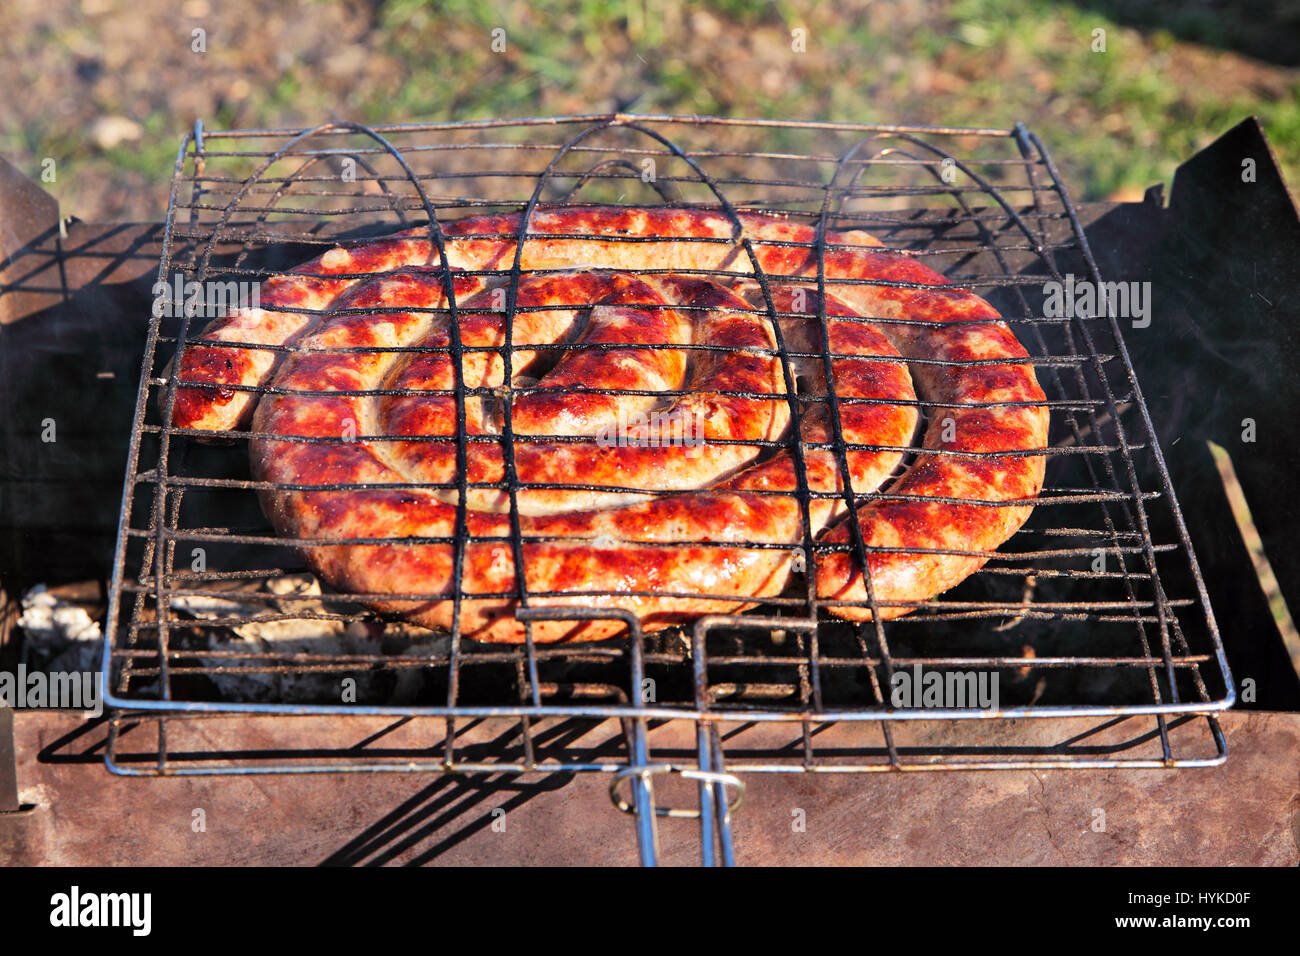 Beef sausages grilled on a coals. Outdoor kielbasa barbecue. BBQ on brazier. Stock Photo